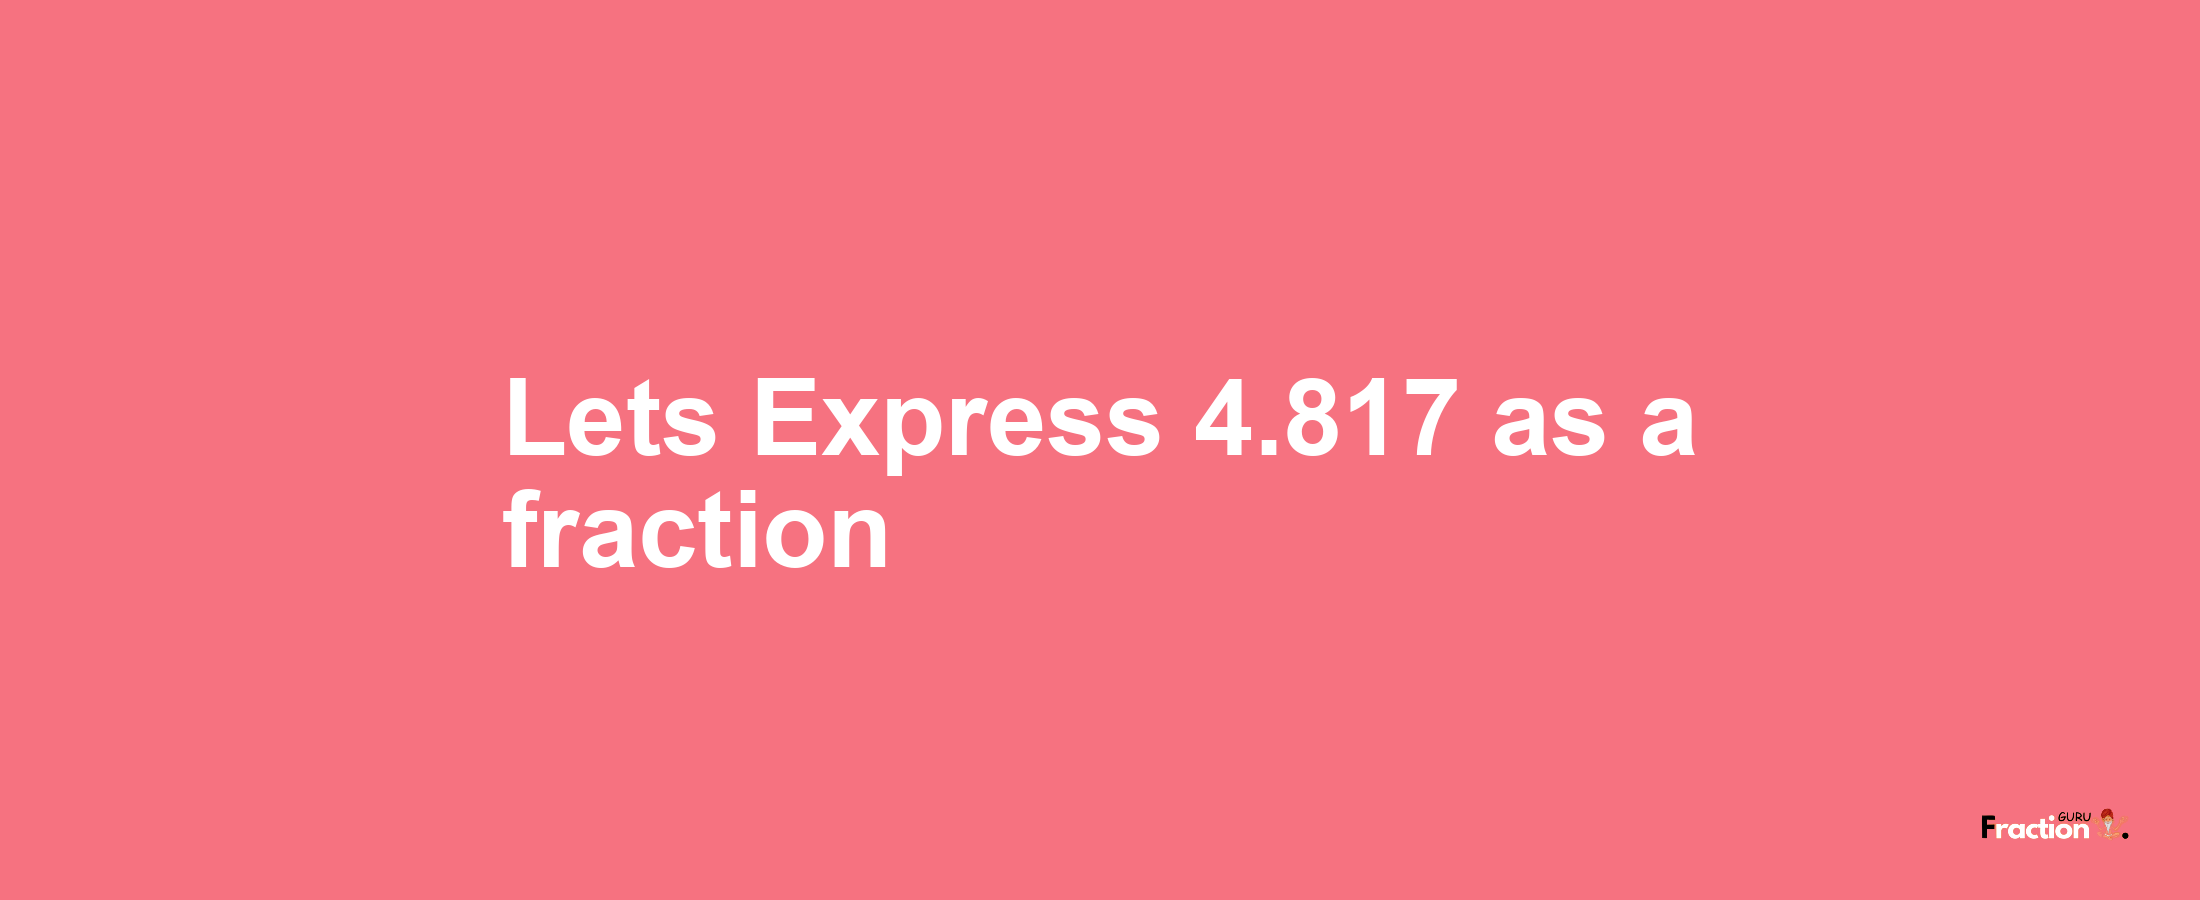 Lets Express 4.817 as afraction